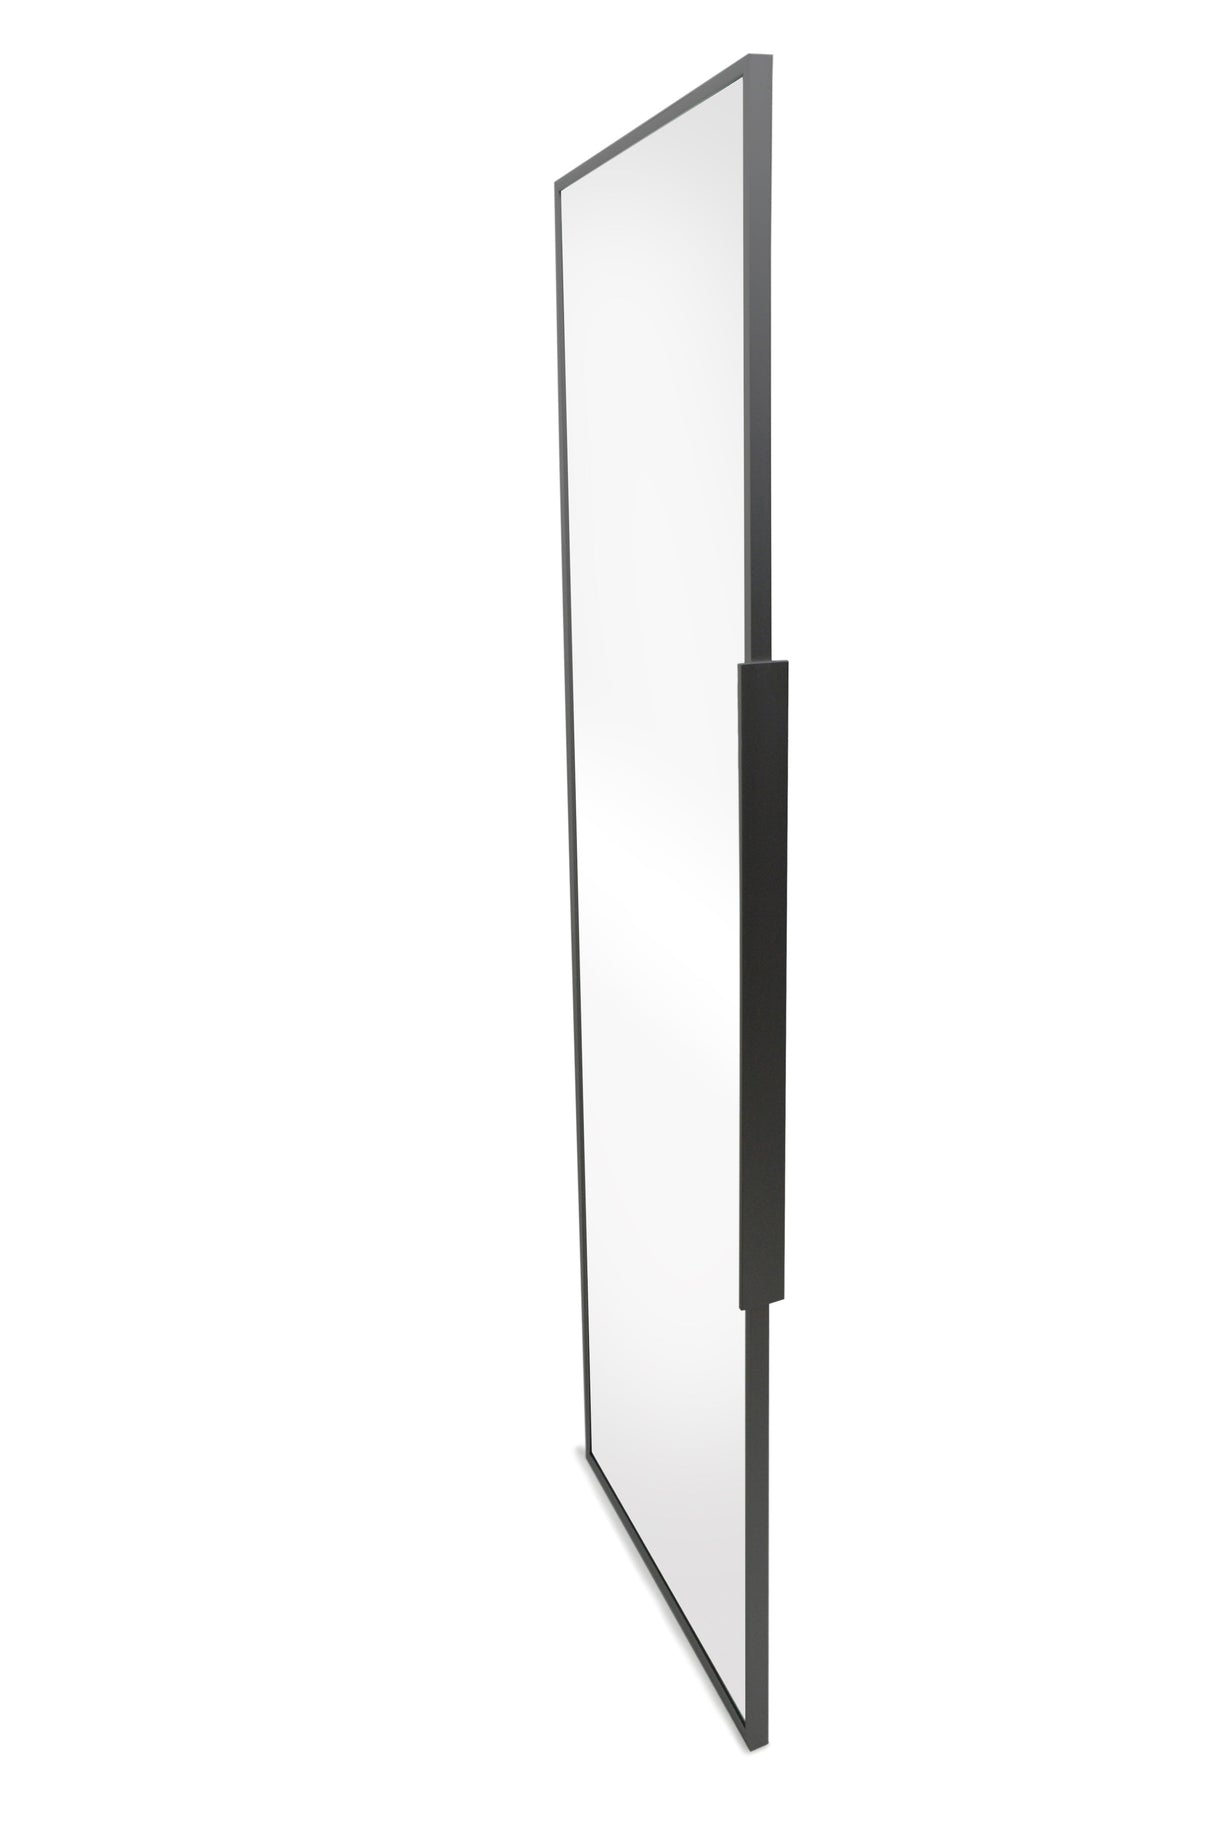 TAG Hardware Premium 35 inch or 47 3/8 Inch Height Pullout Sliding Full Rotation Pivot Mirror with Ball Bearing Slides